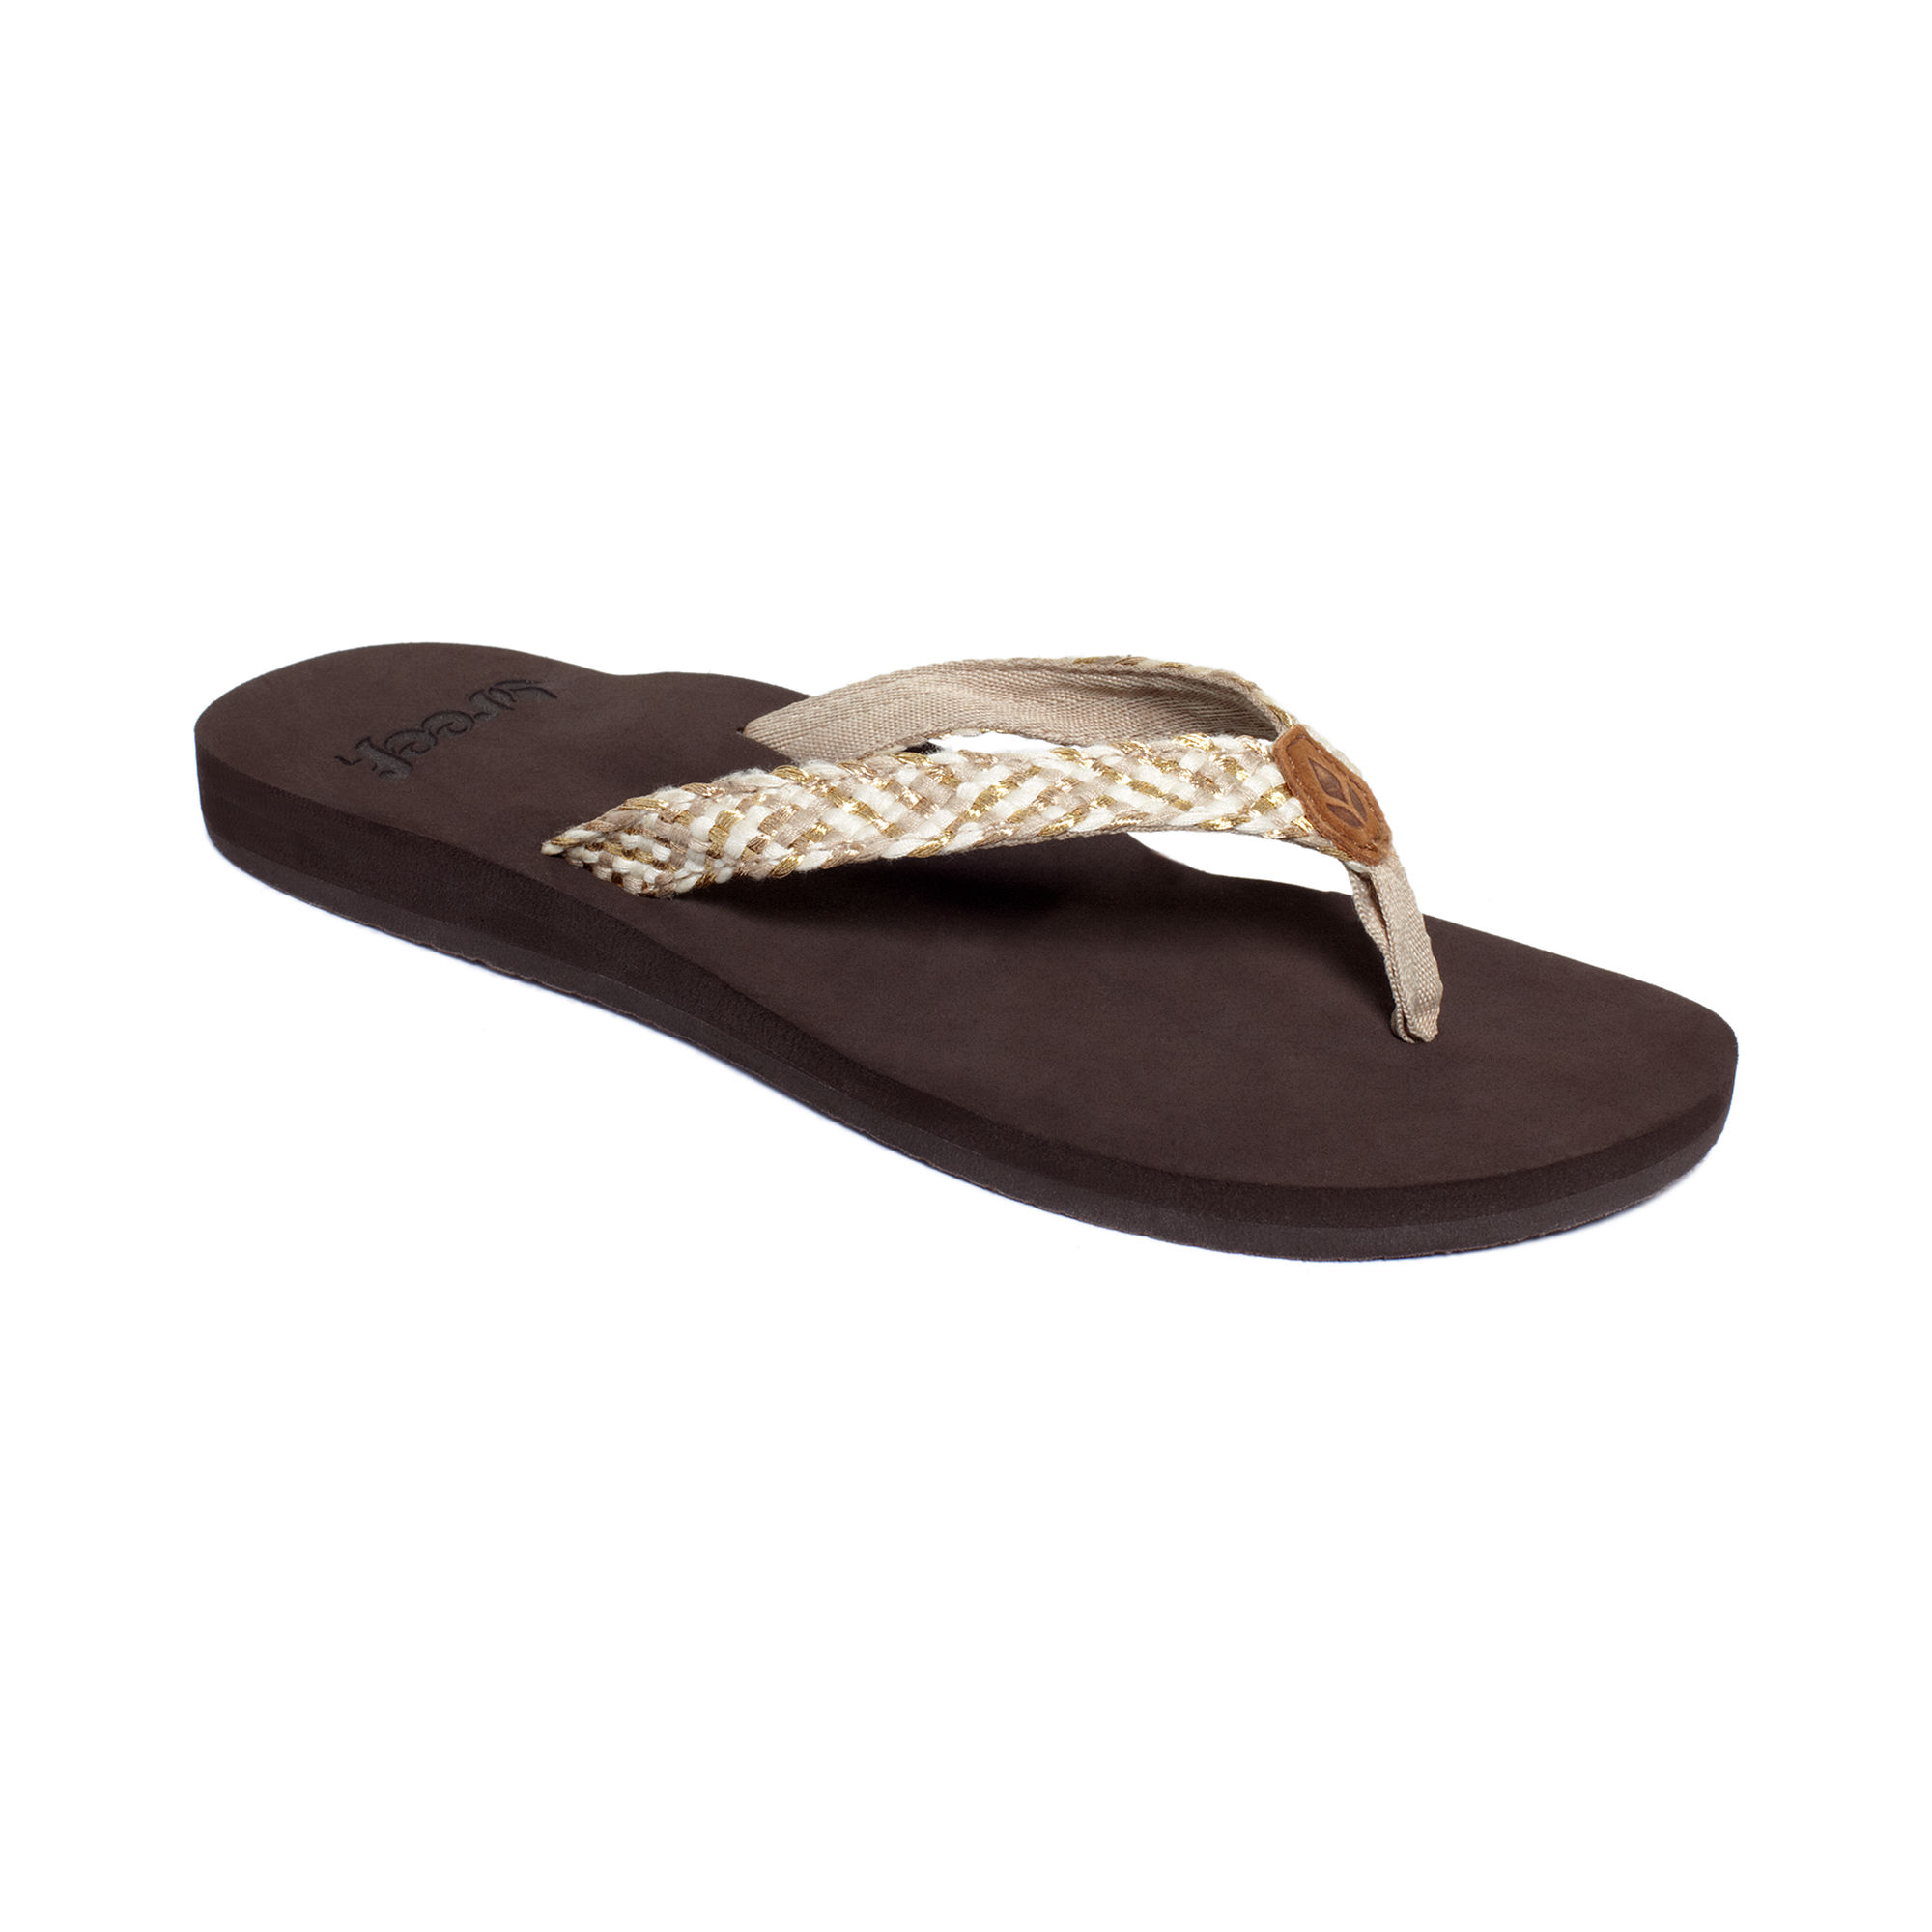 Reef's mallory thong sandals feature braided straps and a thick ...